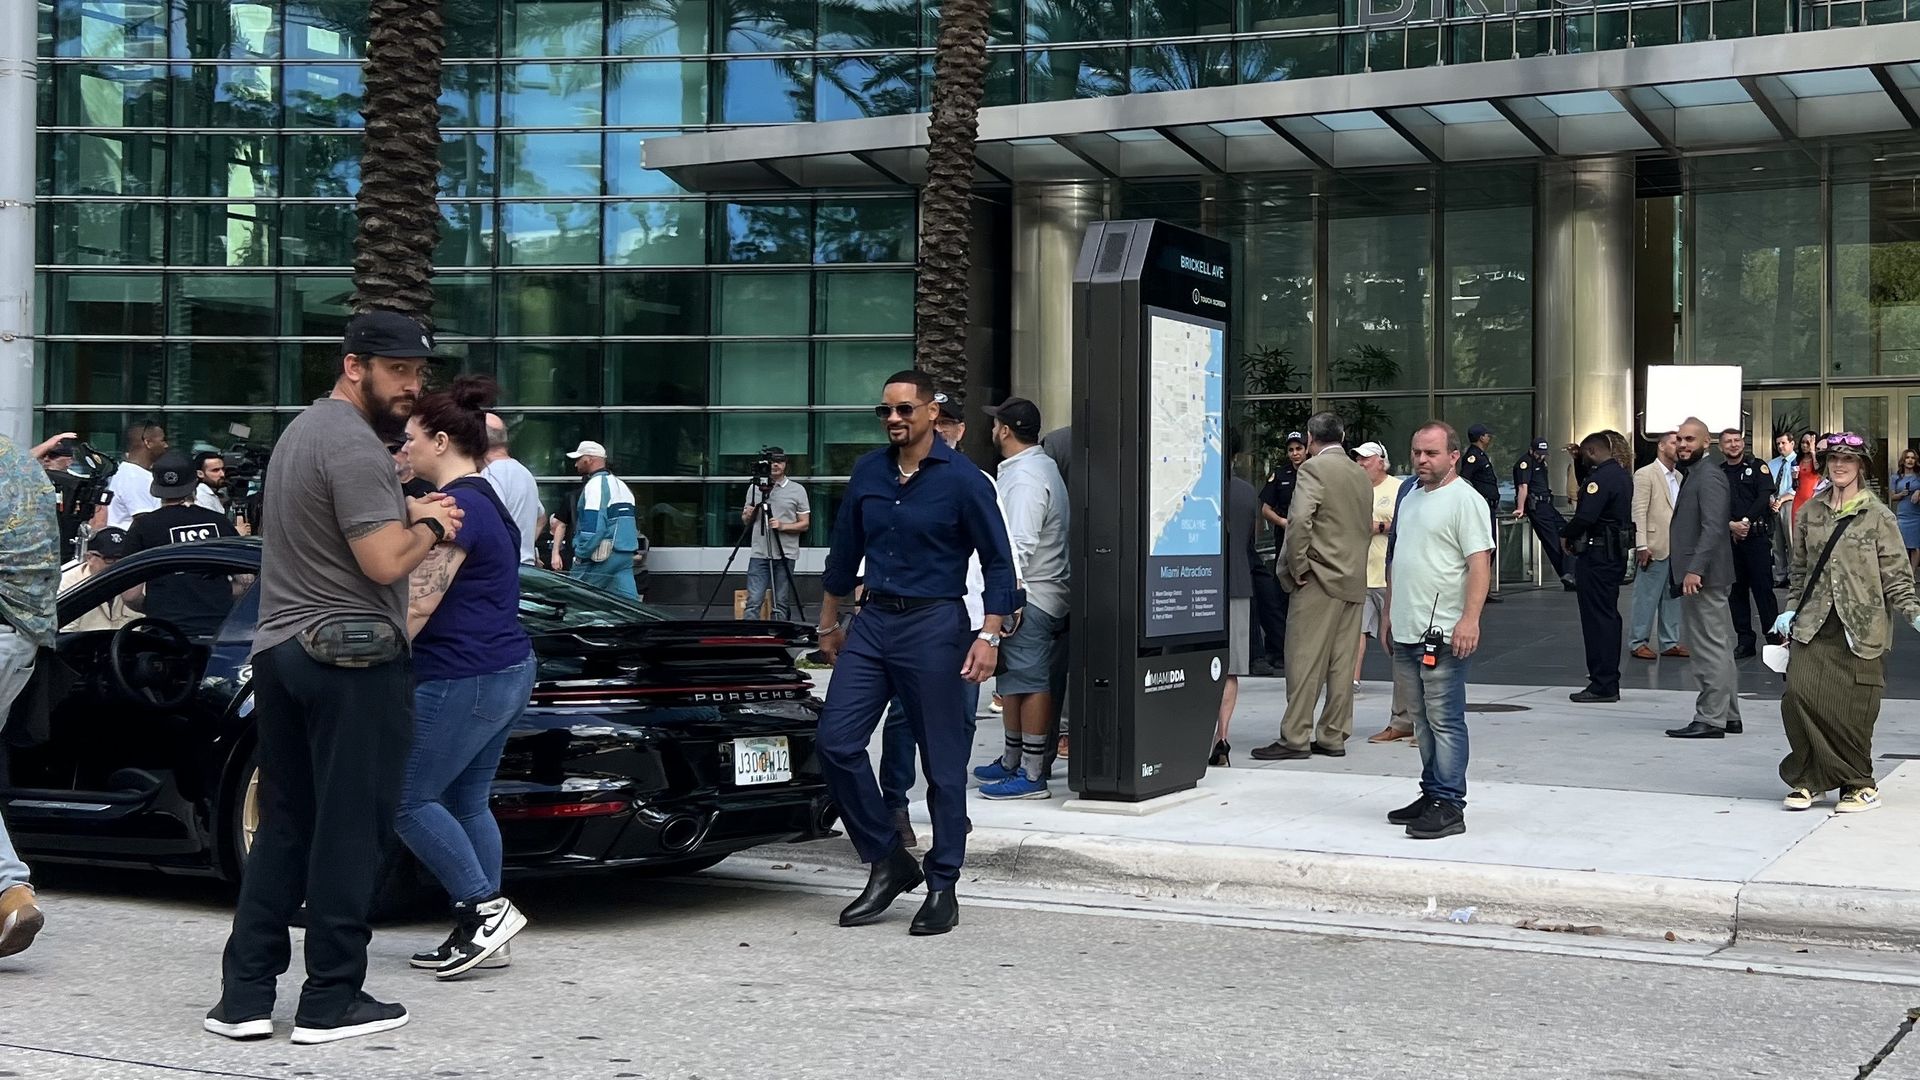 Actor Will Smith walks into the street to get inside a black Porche coupe. 